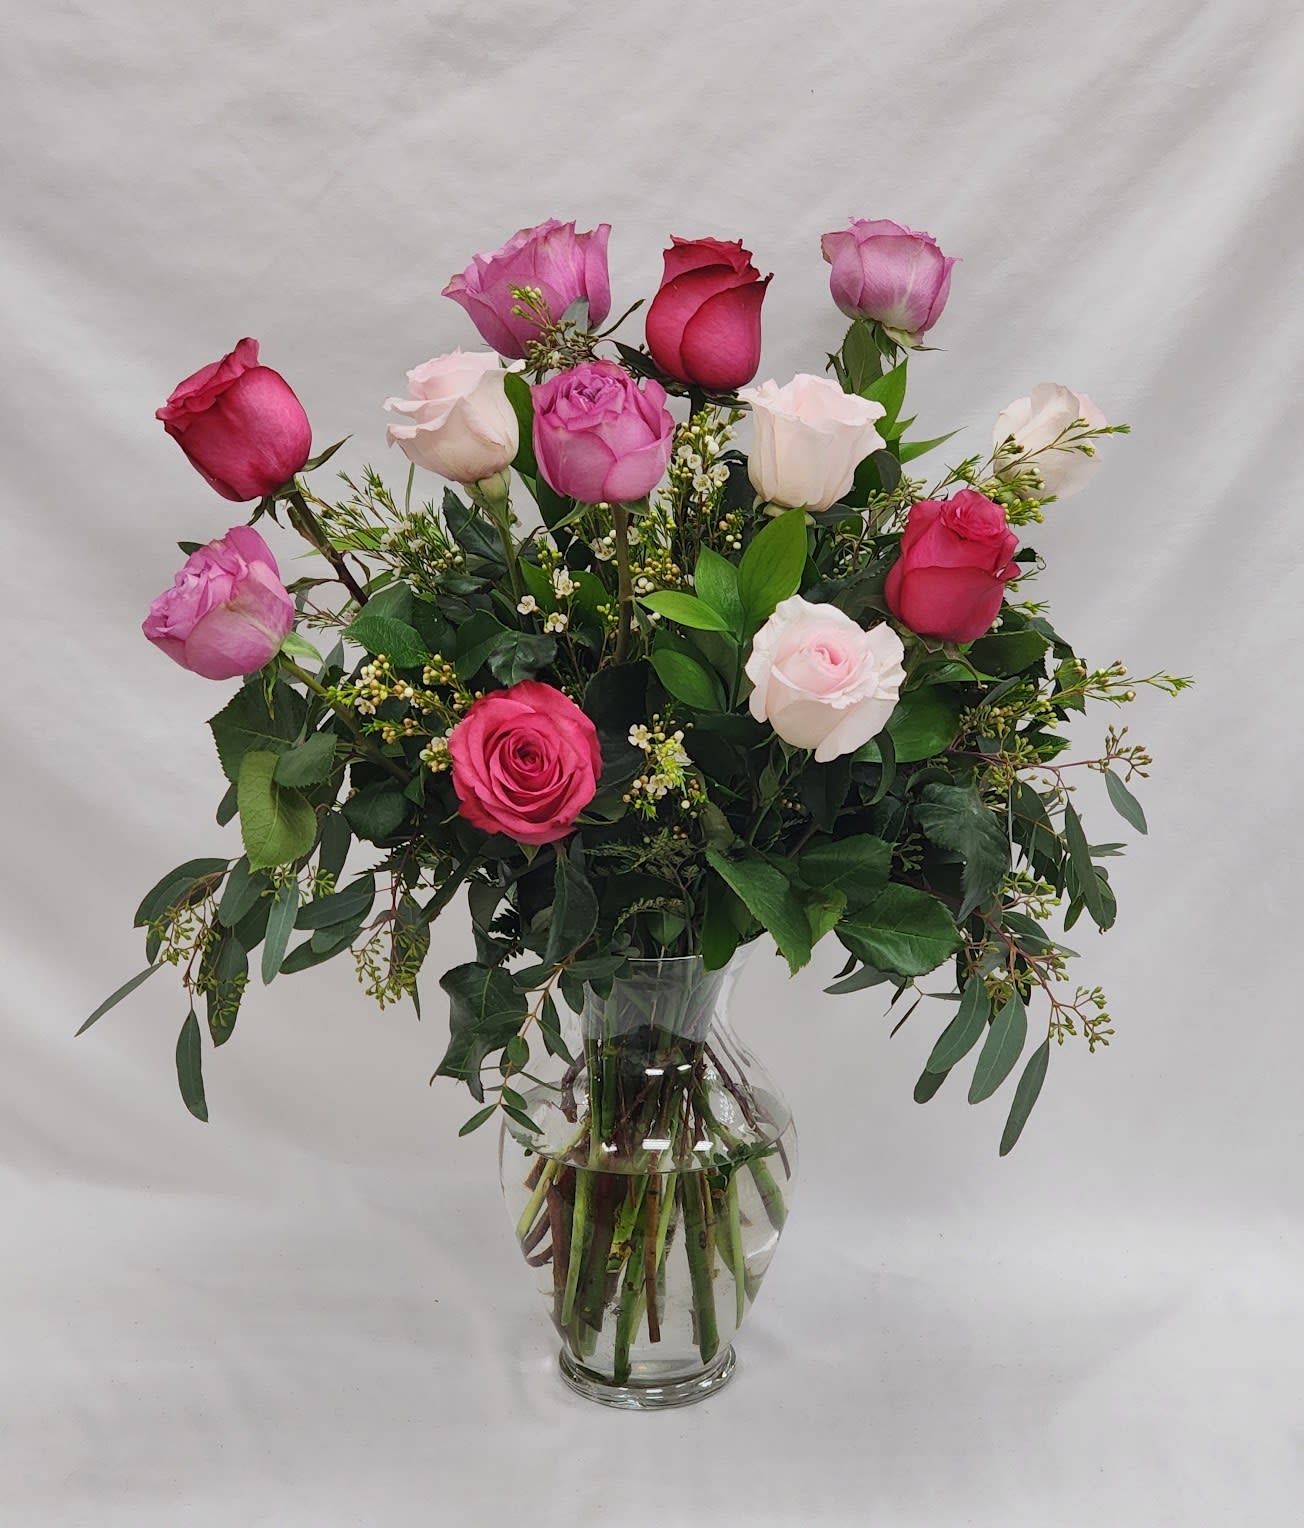 Long Stem Dozen Mixed Pink Roses - A vase full of a dozen roses in various shades of pink